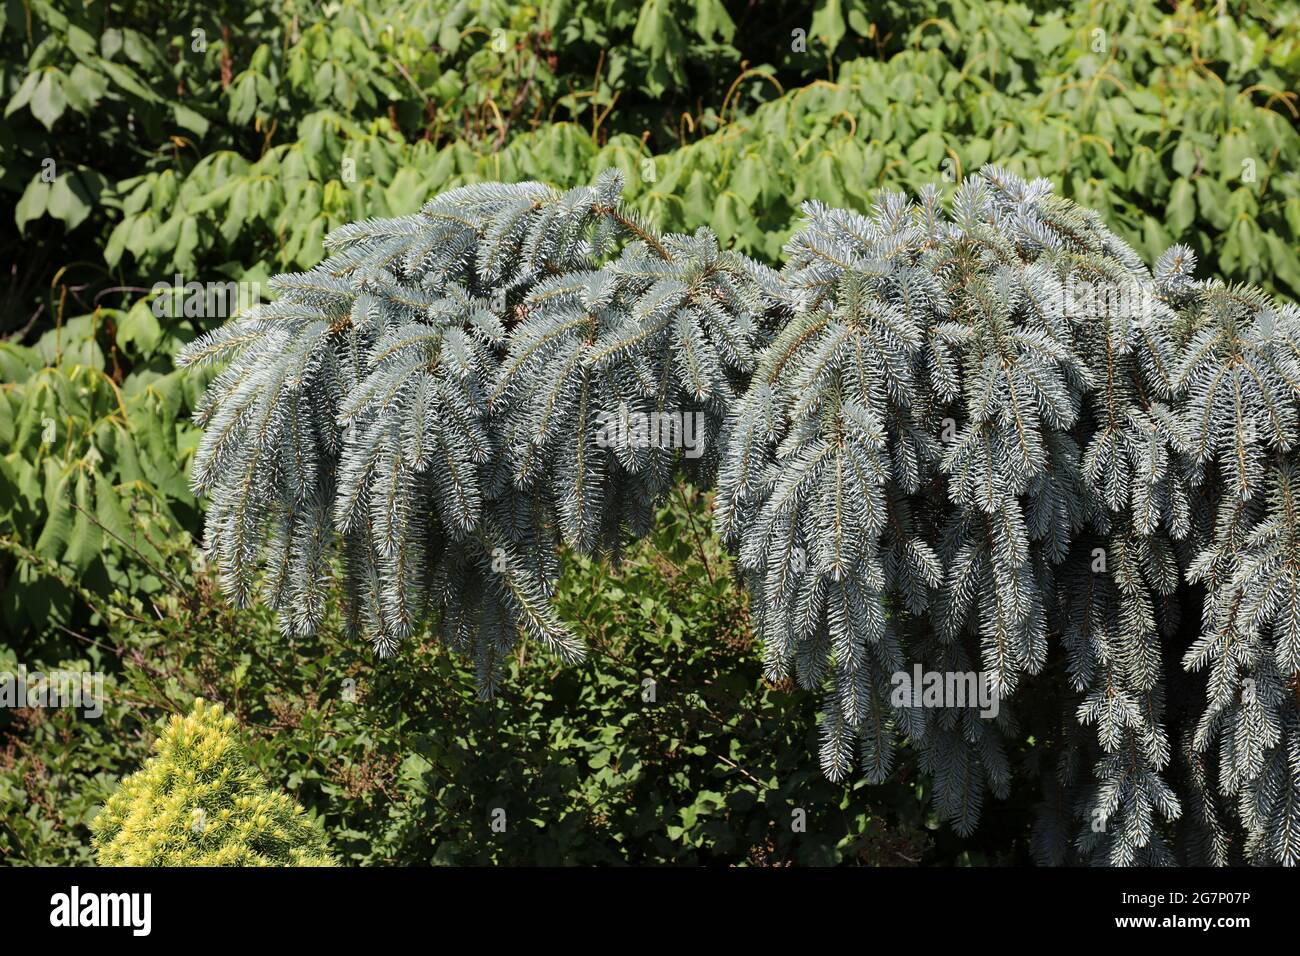 A Weeping Colorado Spruce, Picea Pungens, in a garden in Wisconsin Stock Photo